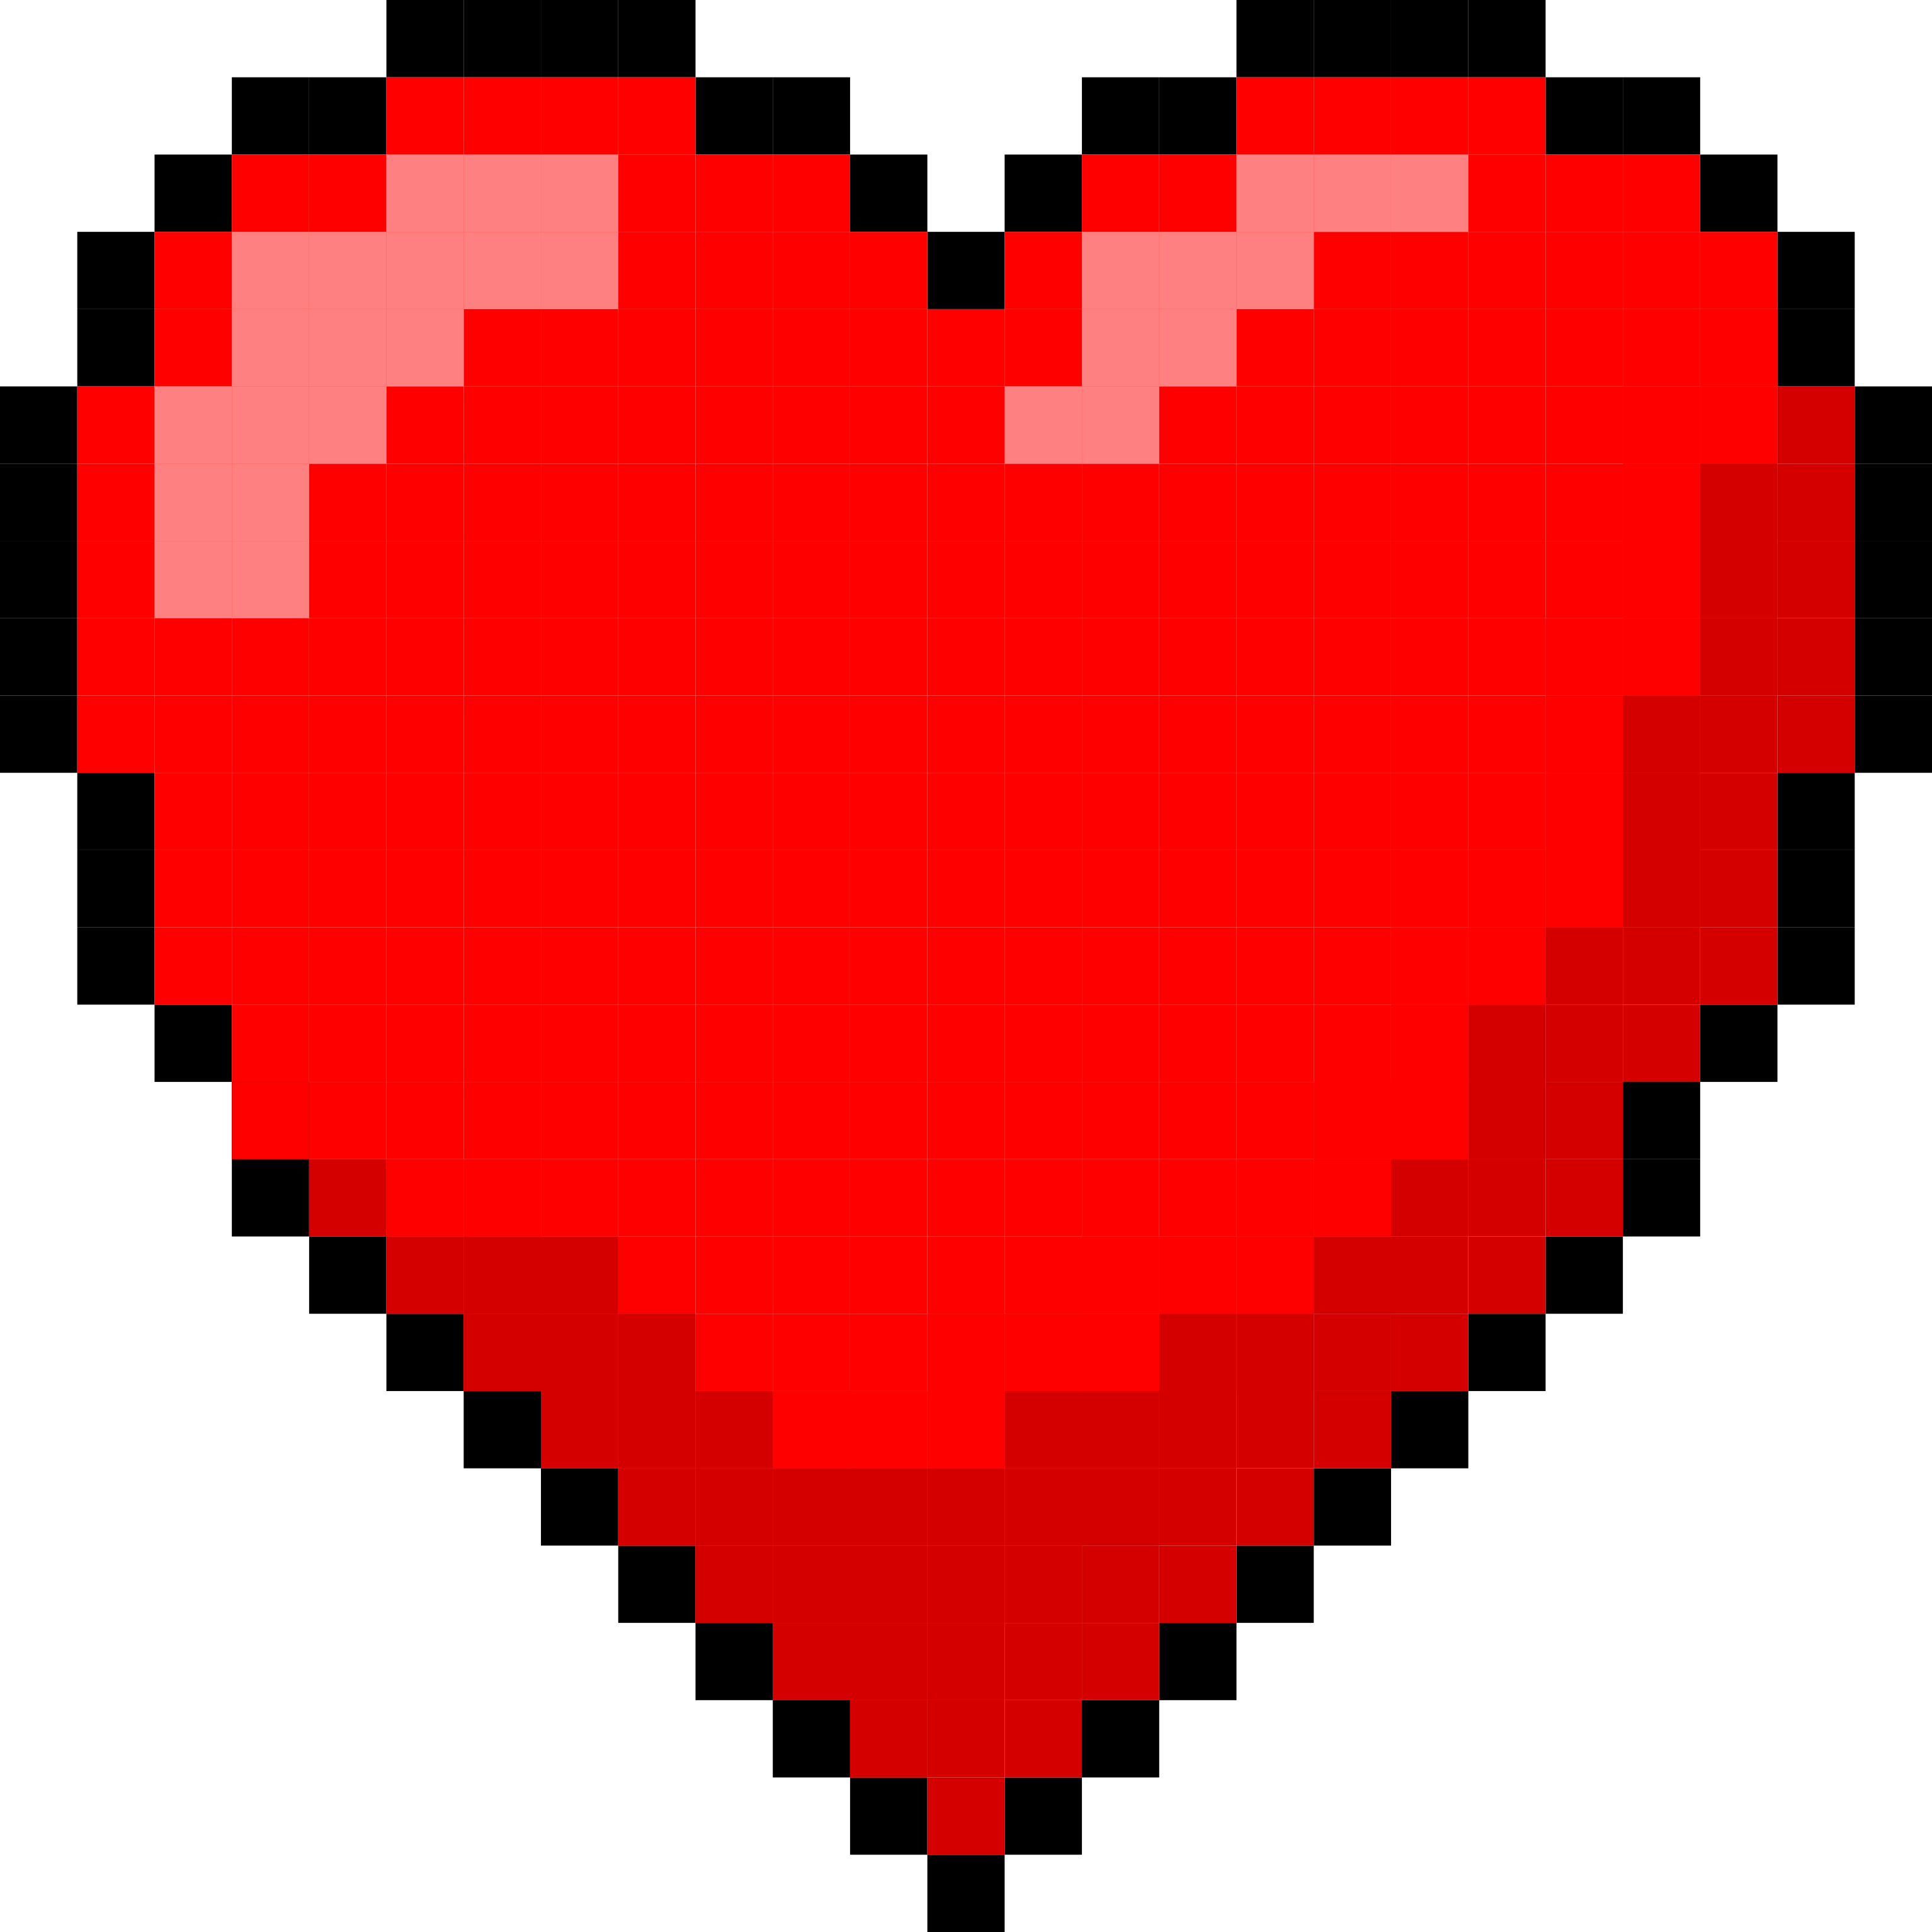 A Pixelated Heart With Black Background